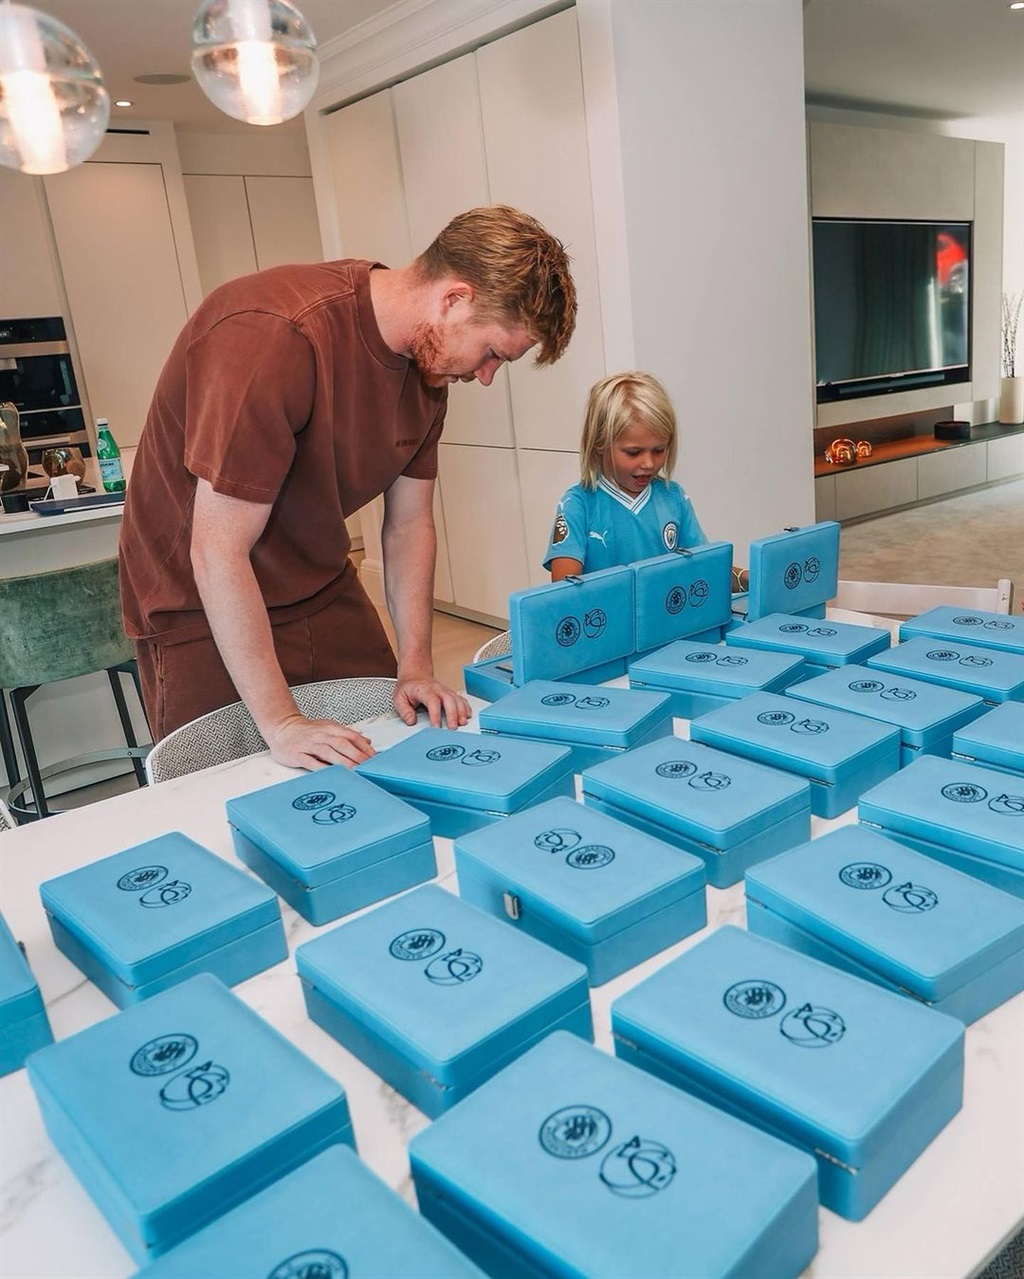 Kevin De Bruyne has handed out 26 specially commis